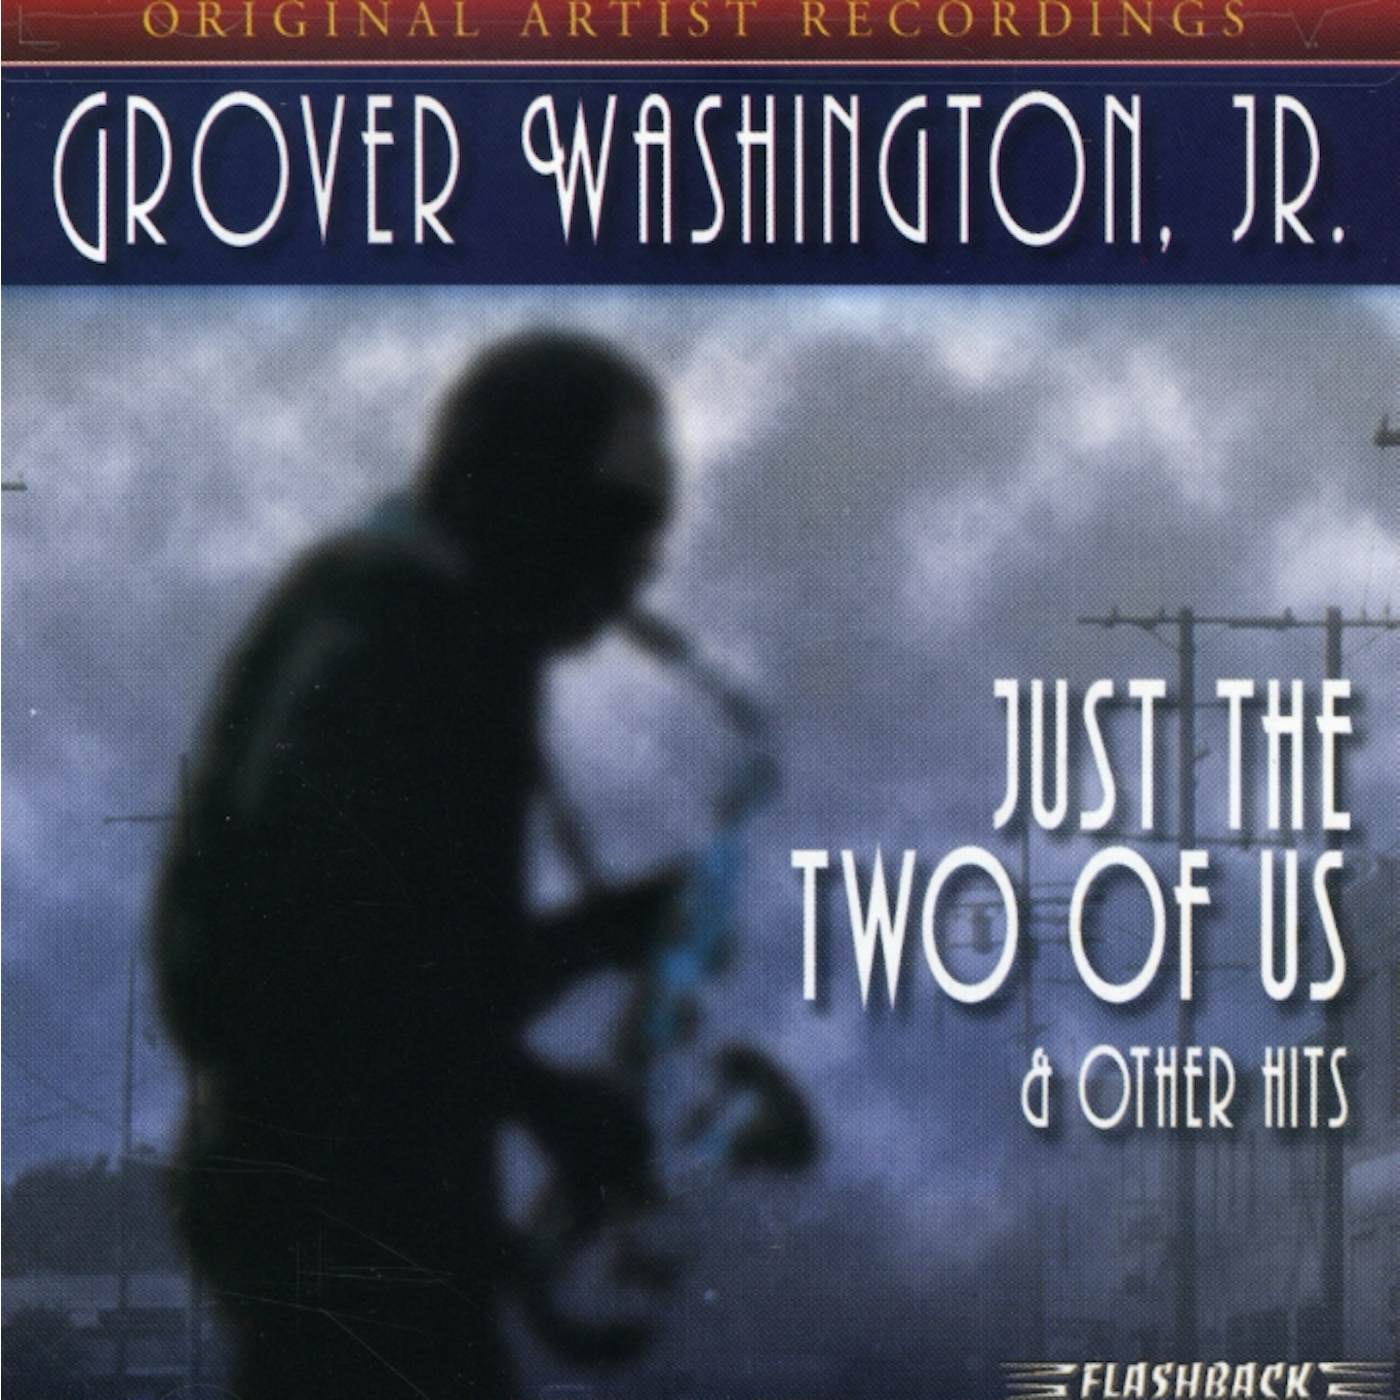 Grover Washington, Jr. JUST THE TWO OF US & OTHER HITS CD